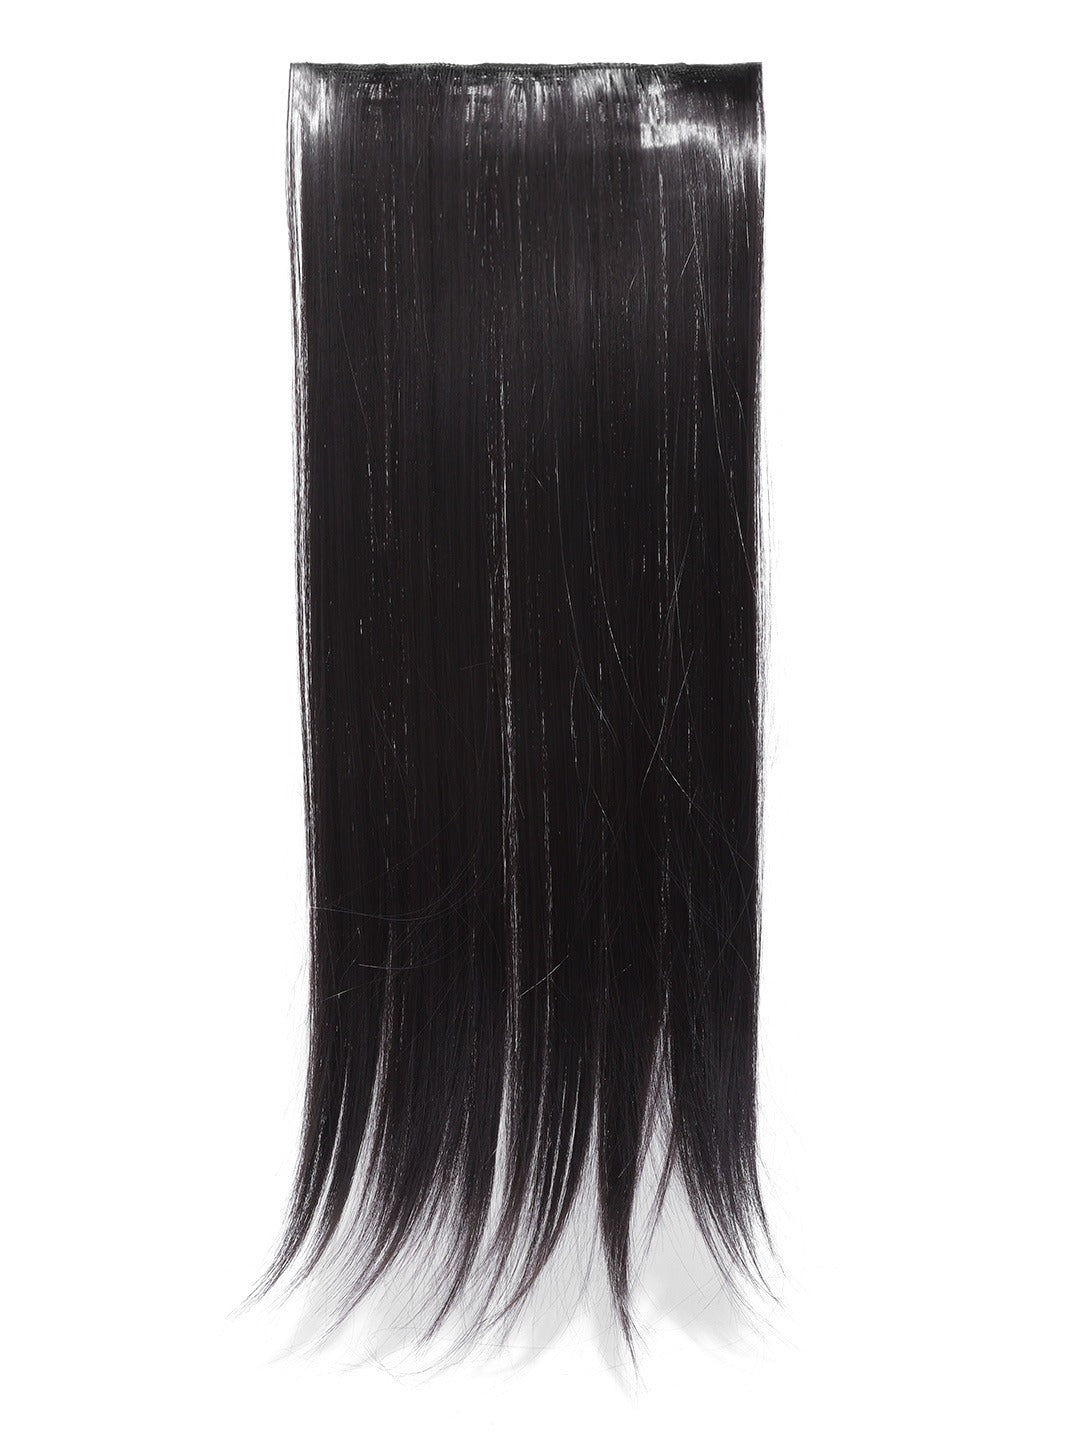 Blueberry dark brown Straight Hair Extension with 5 clips